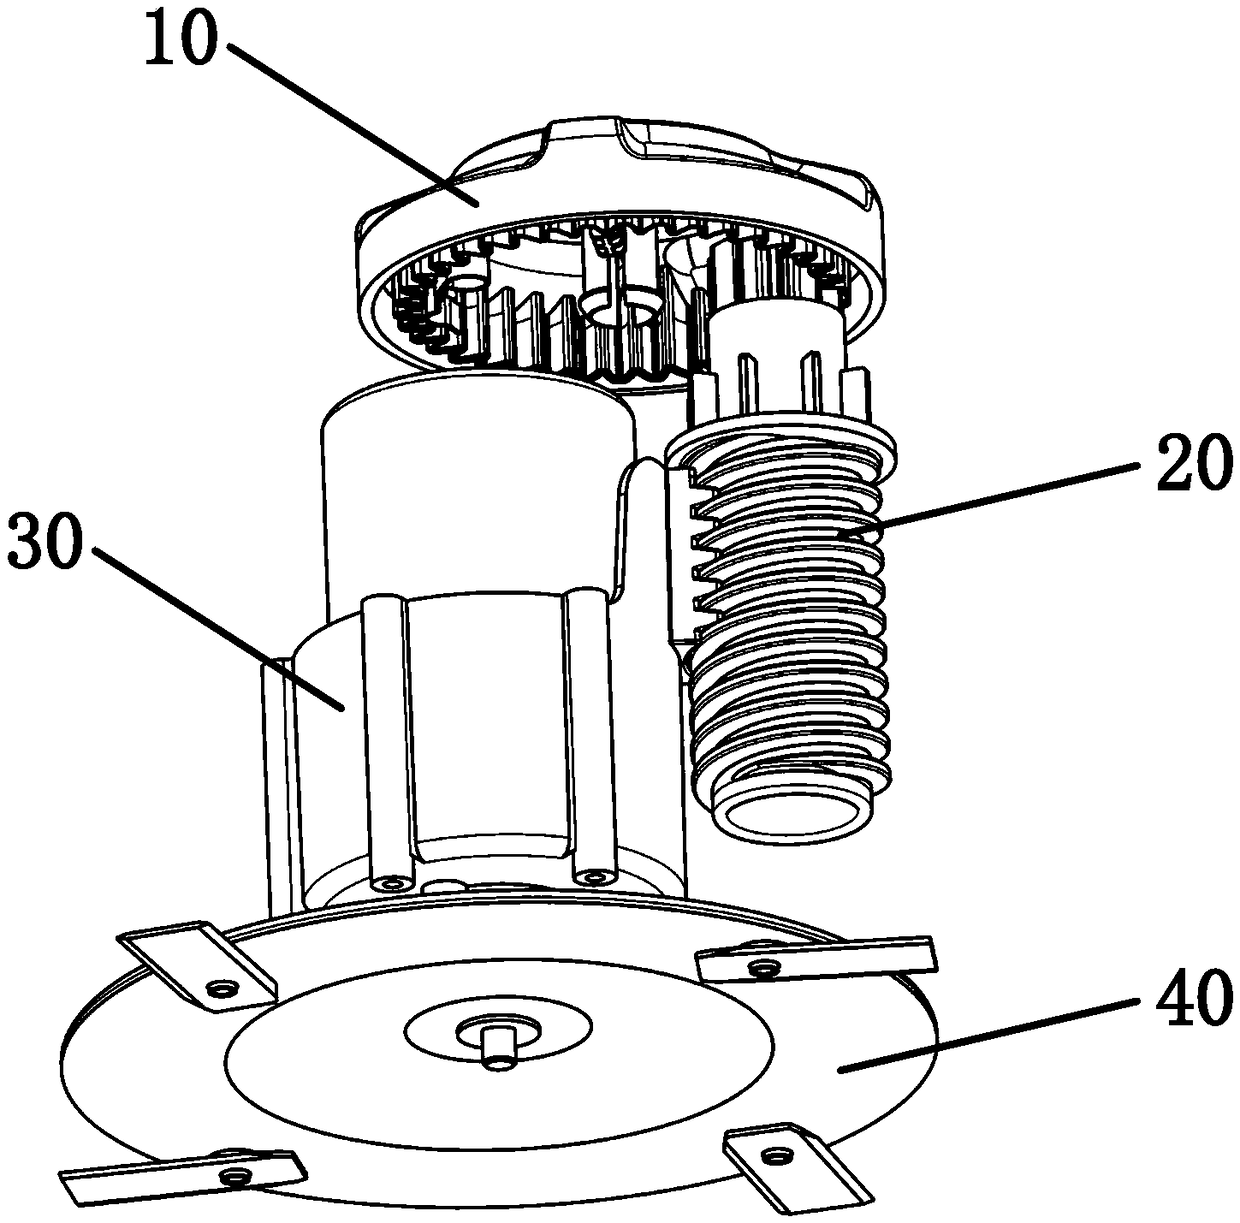 Cutter disk anti-dithering device and mower